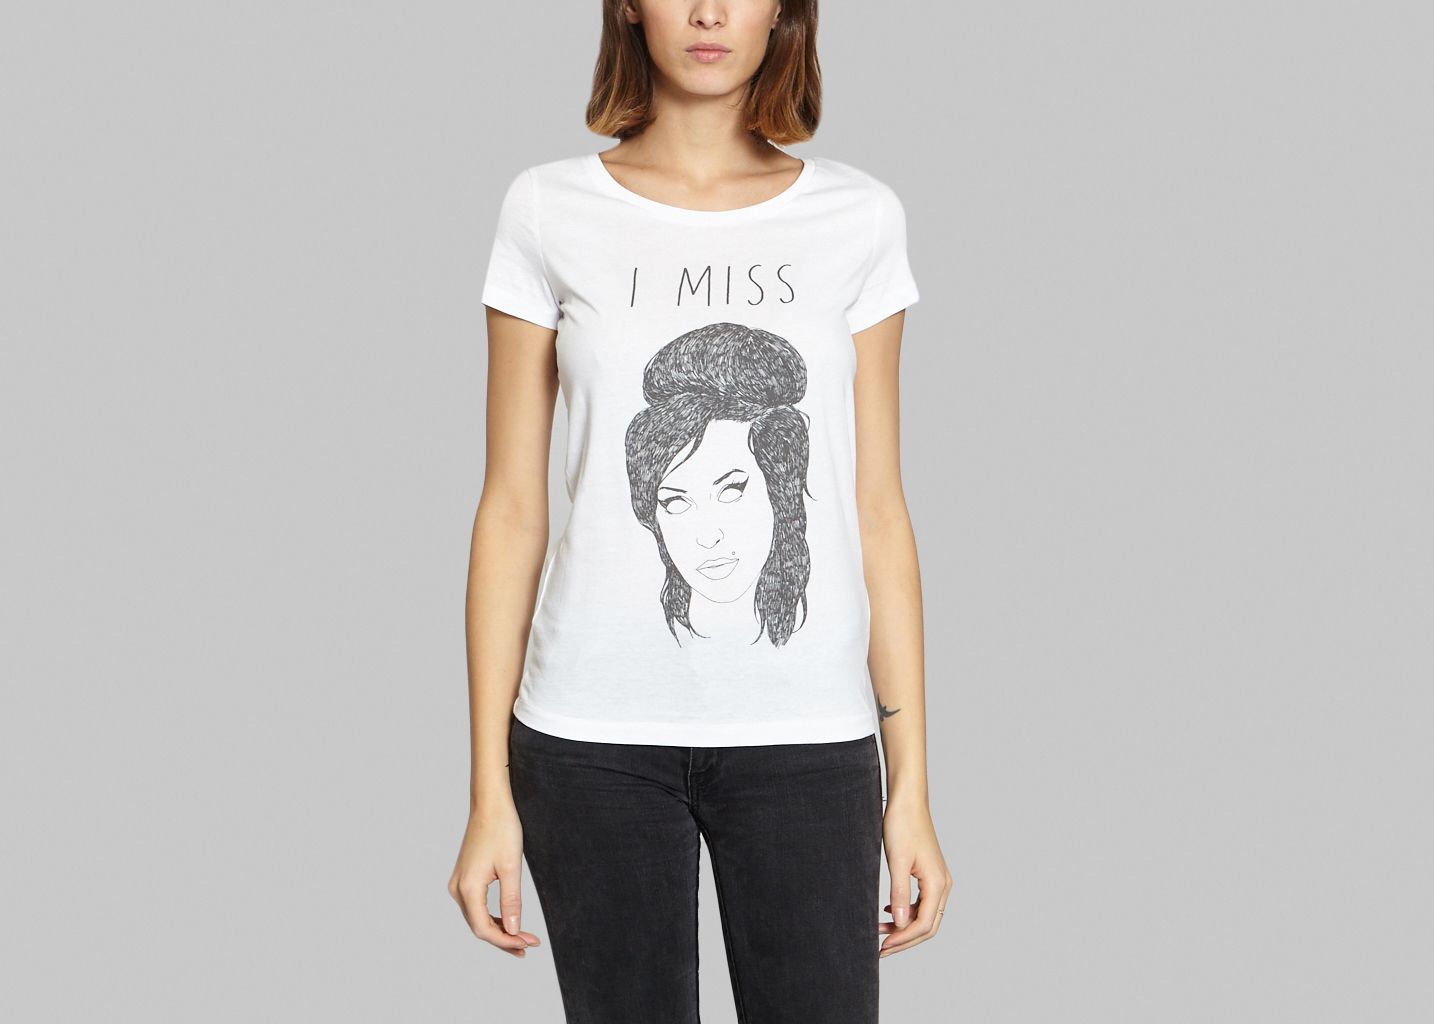 I Miss Amy Winehouse T-shirt - Unseven